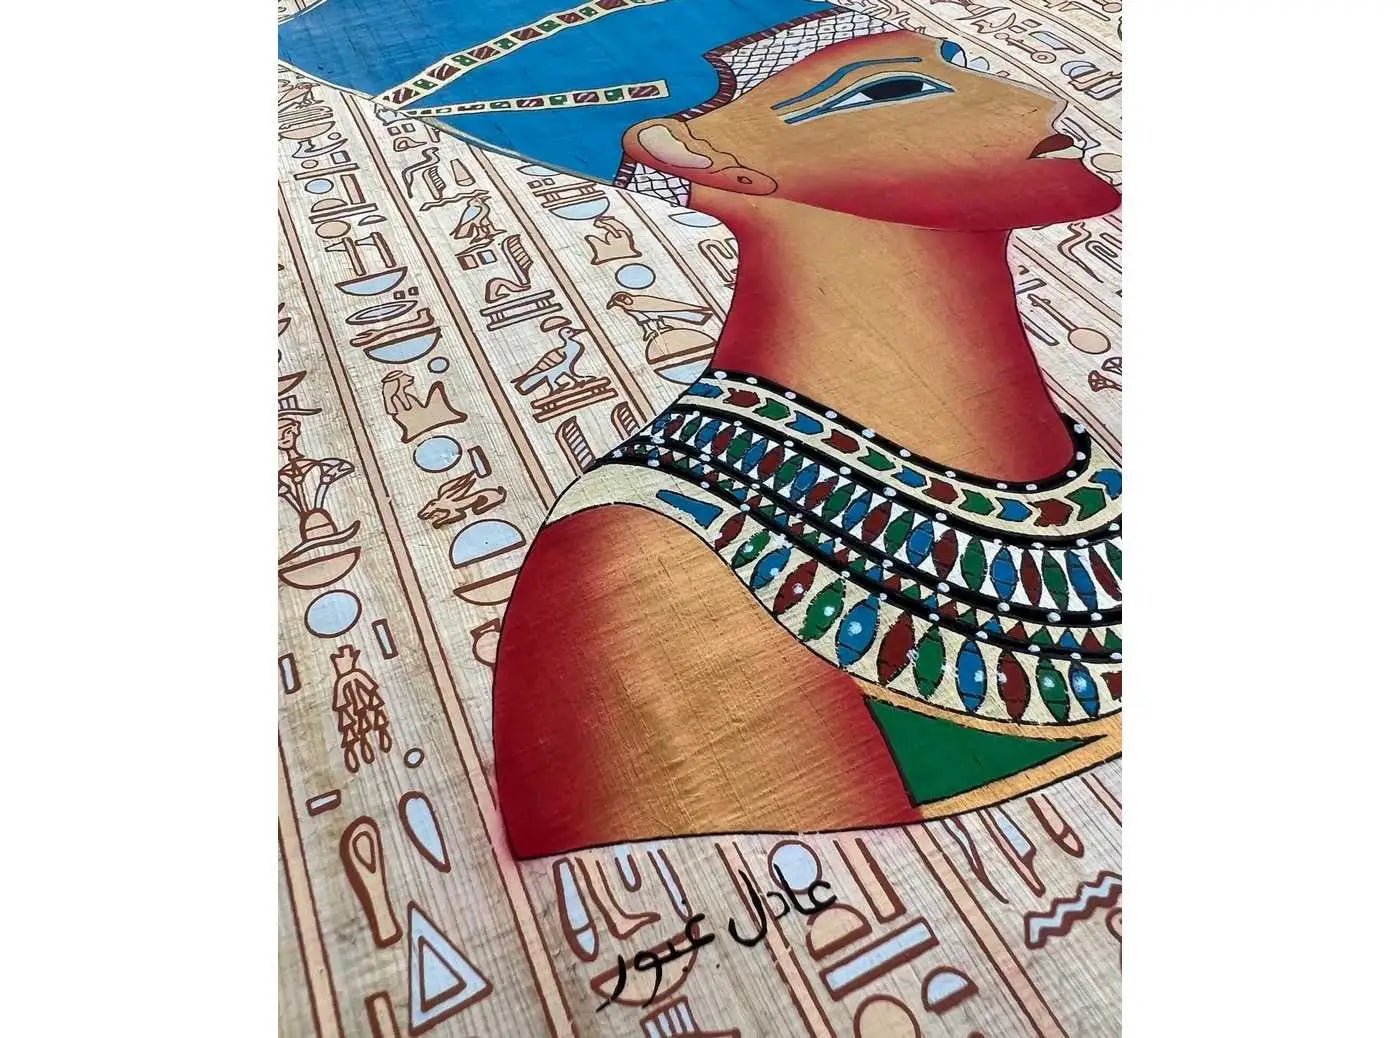 Nefertiti the Iconic Egyptian Queen - Egypt's Lost Queen - Most Powerful and One of The Most Beautiful Women in Antiquity - Papyrus Painting